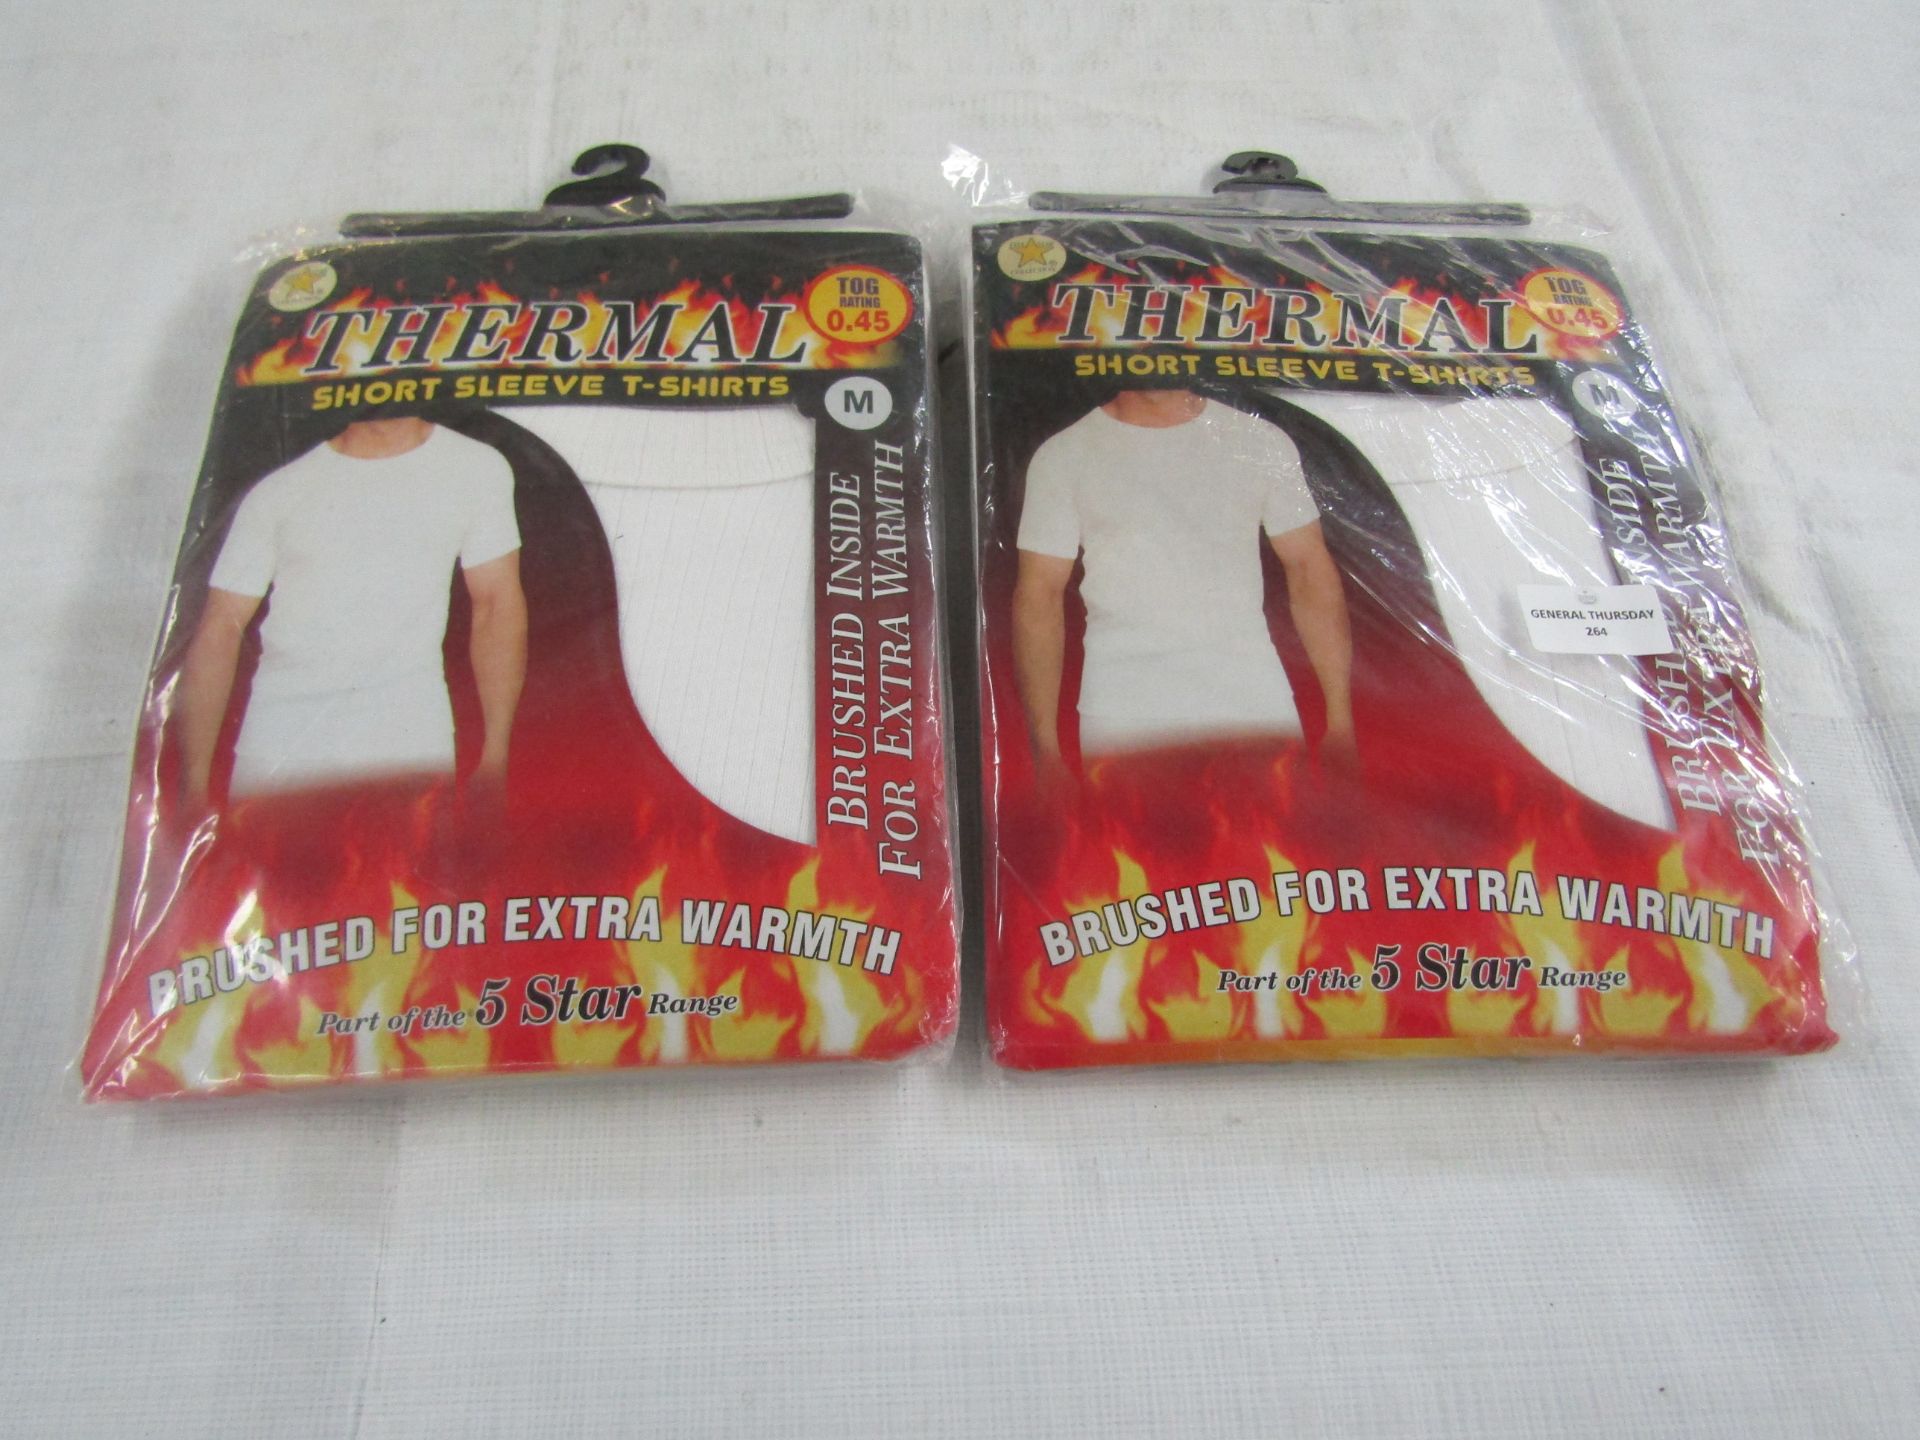 2x Thermal - White Short Sleeved T-Shirts - Size Medium - Packaged.